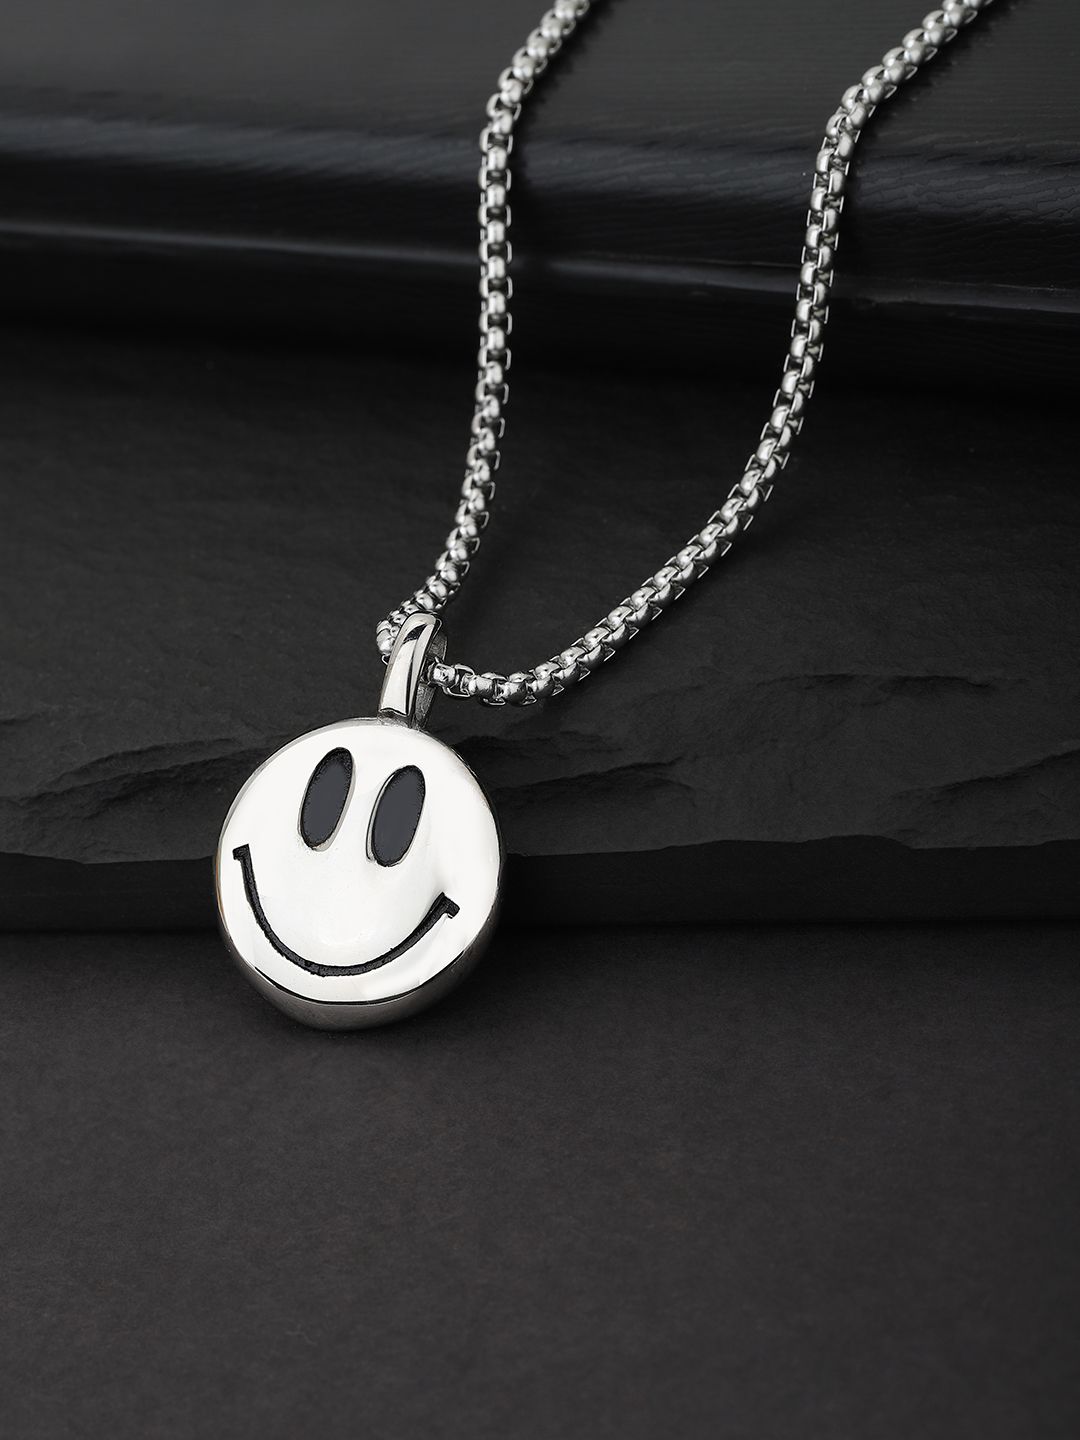 Carlton London Silver-Plated & Black Necklace Price in India